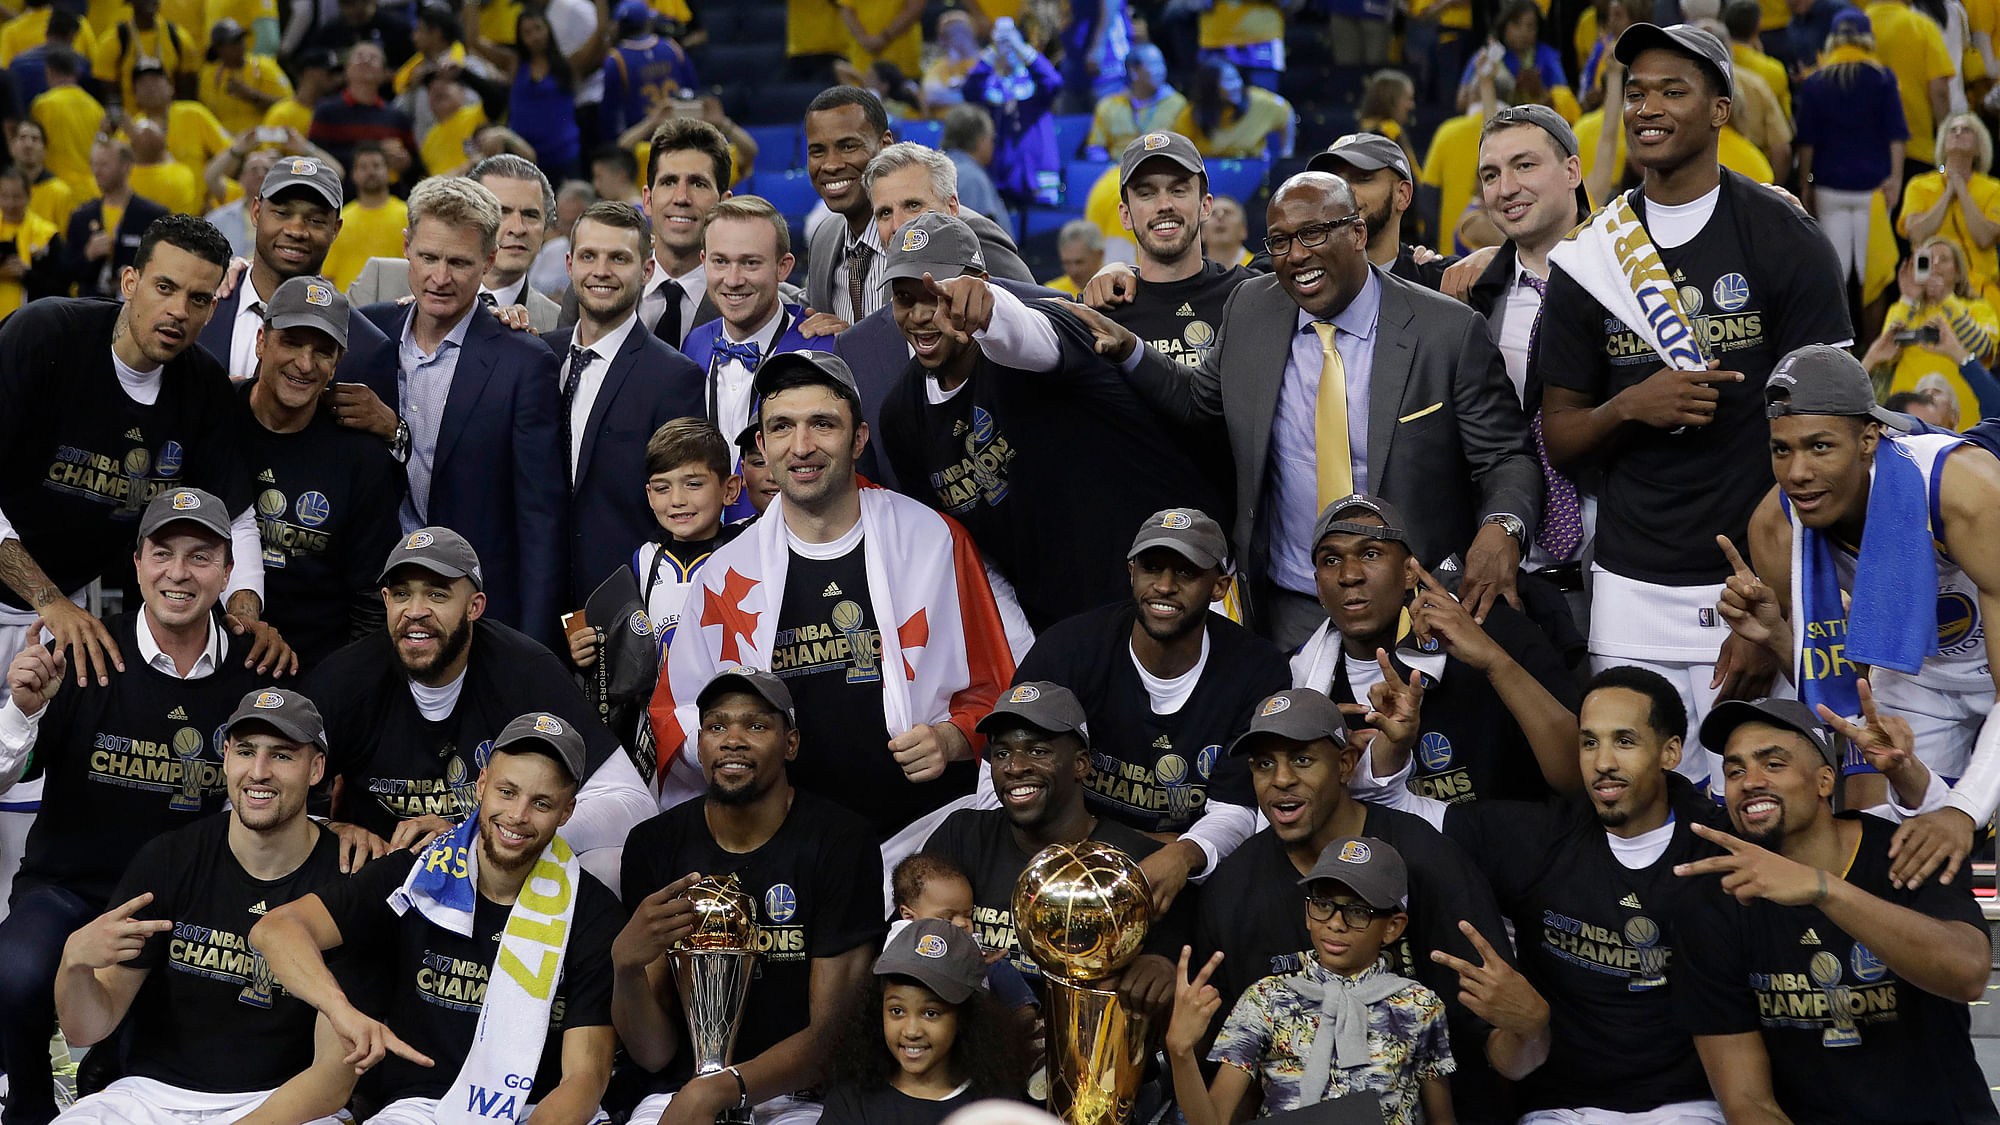 Golden State Warriors beat the Cleveland Cavaliers to win their second NBA championship in three seasons. (Photo: AP)